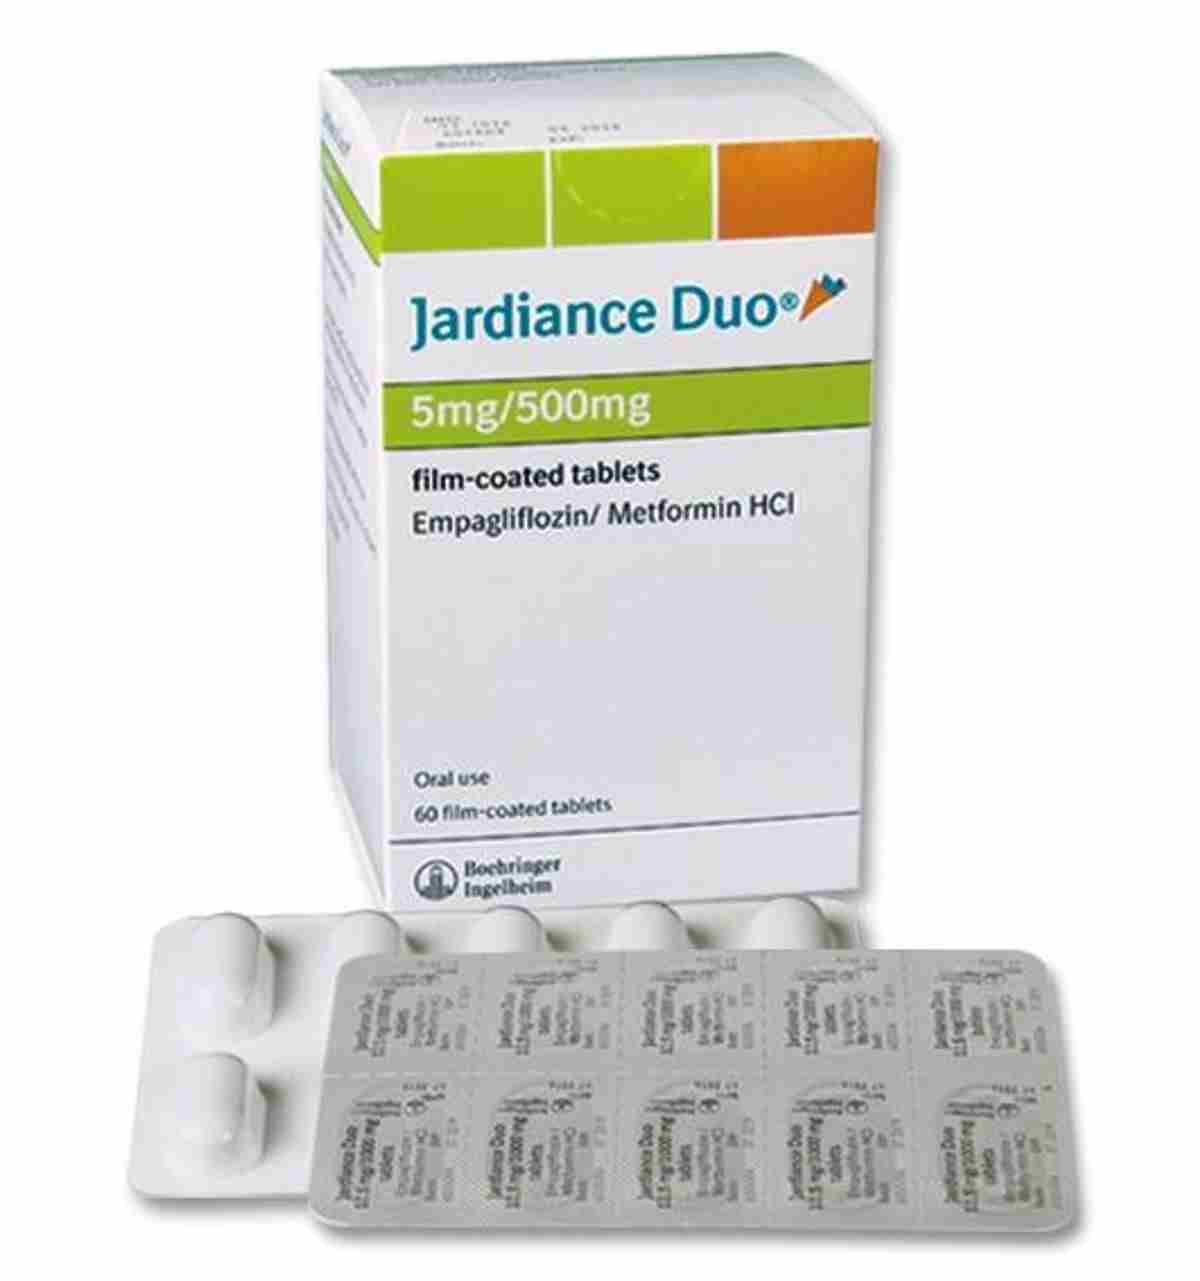 Jardiance Duo 12.5mg/850mg Tablet- Uses, Dosage, Side Effects, Price